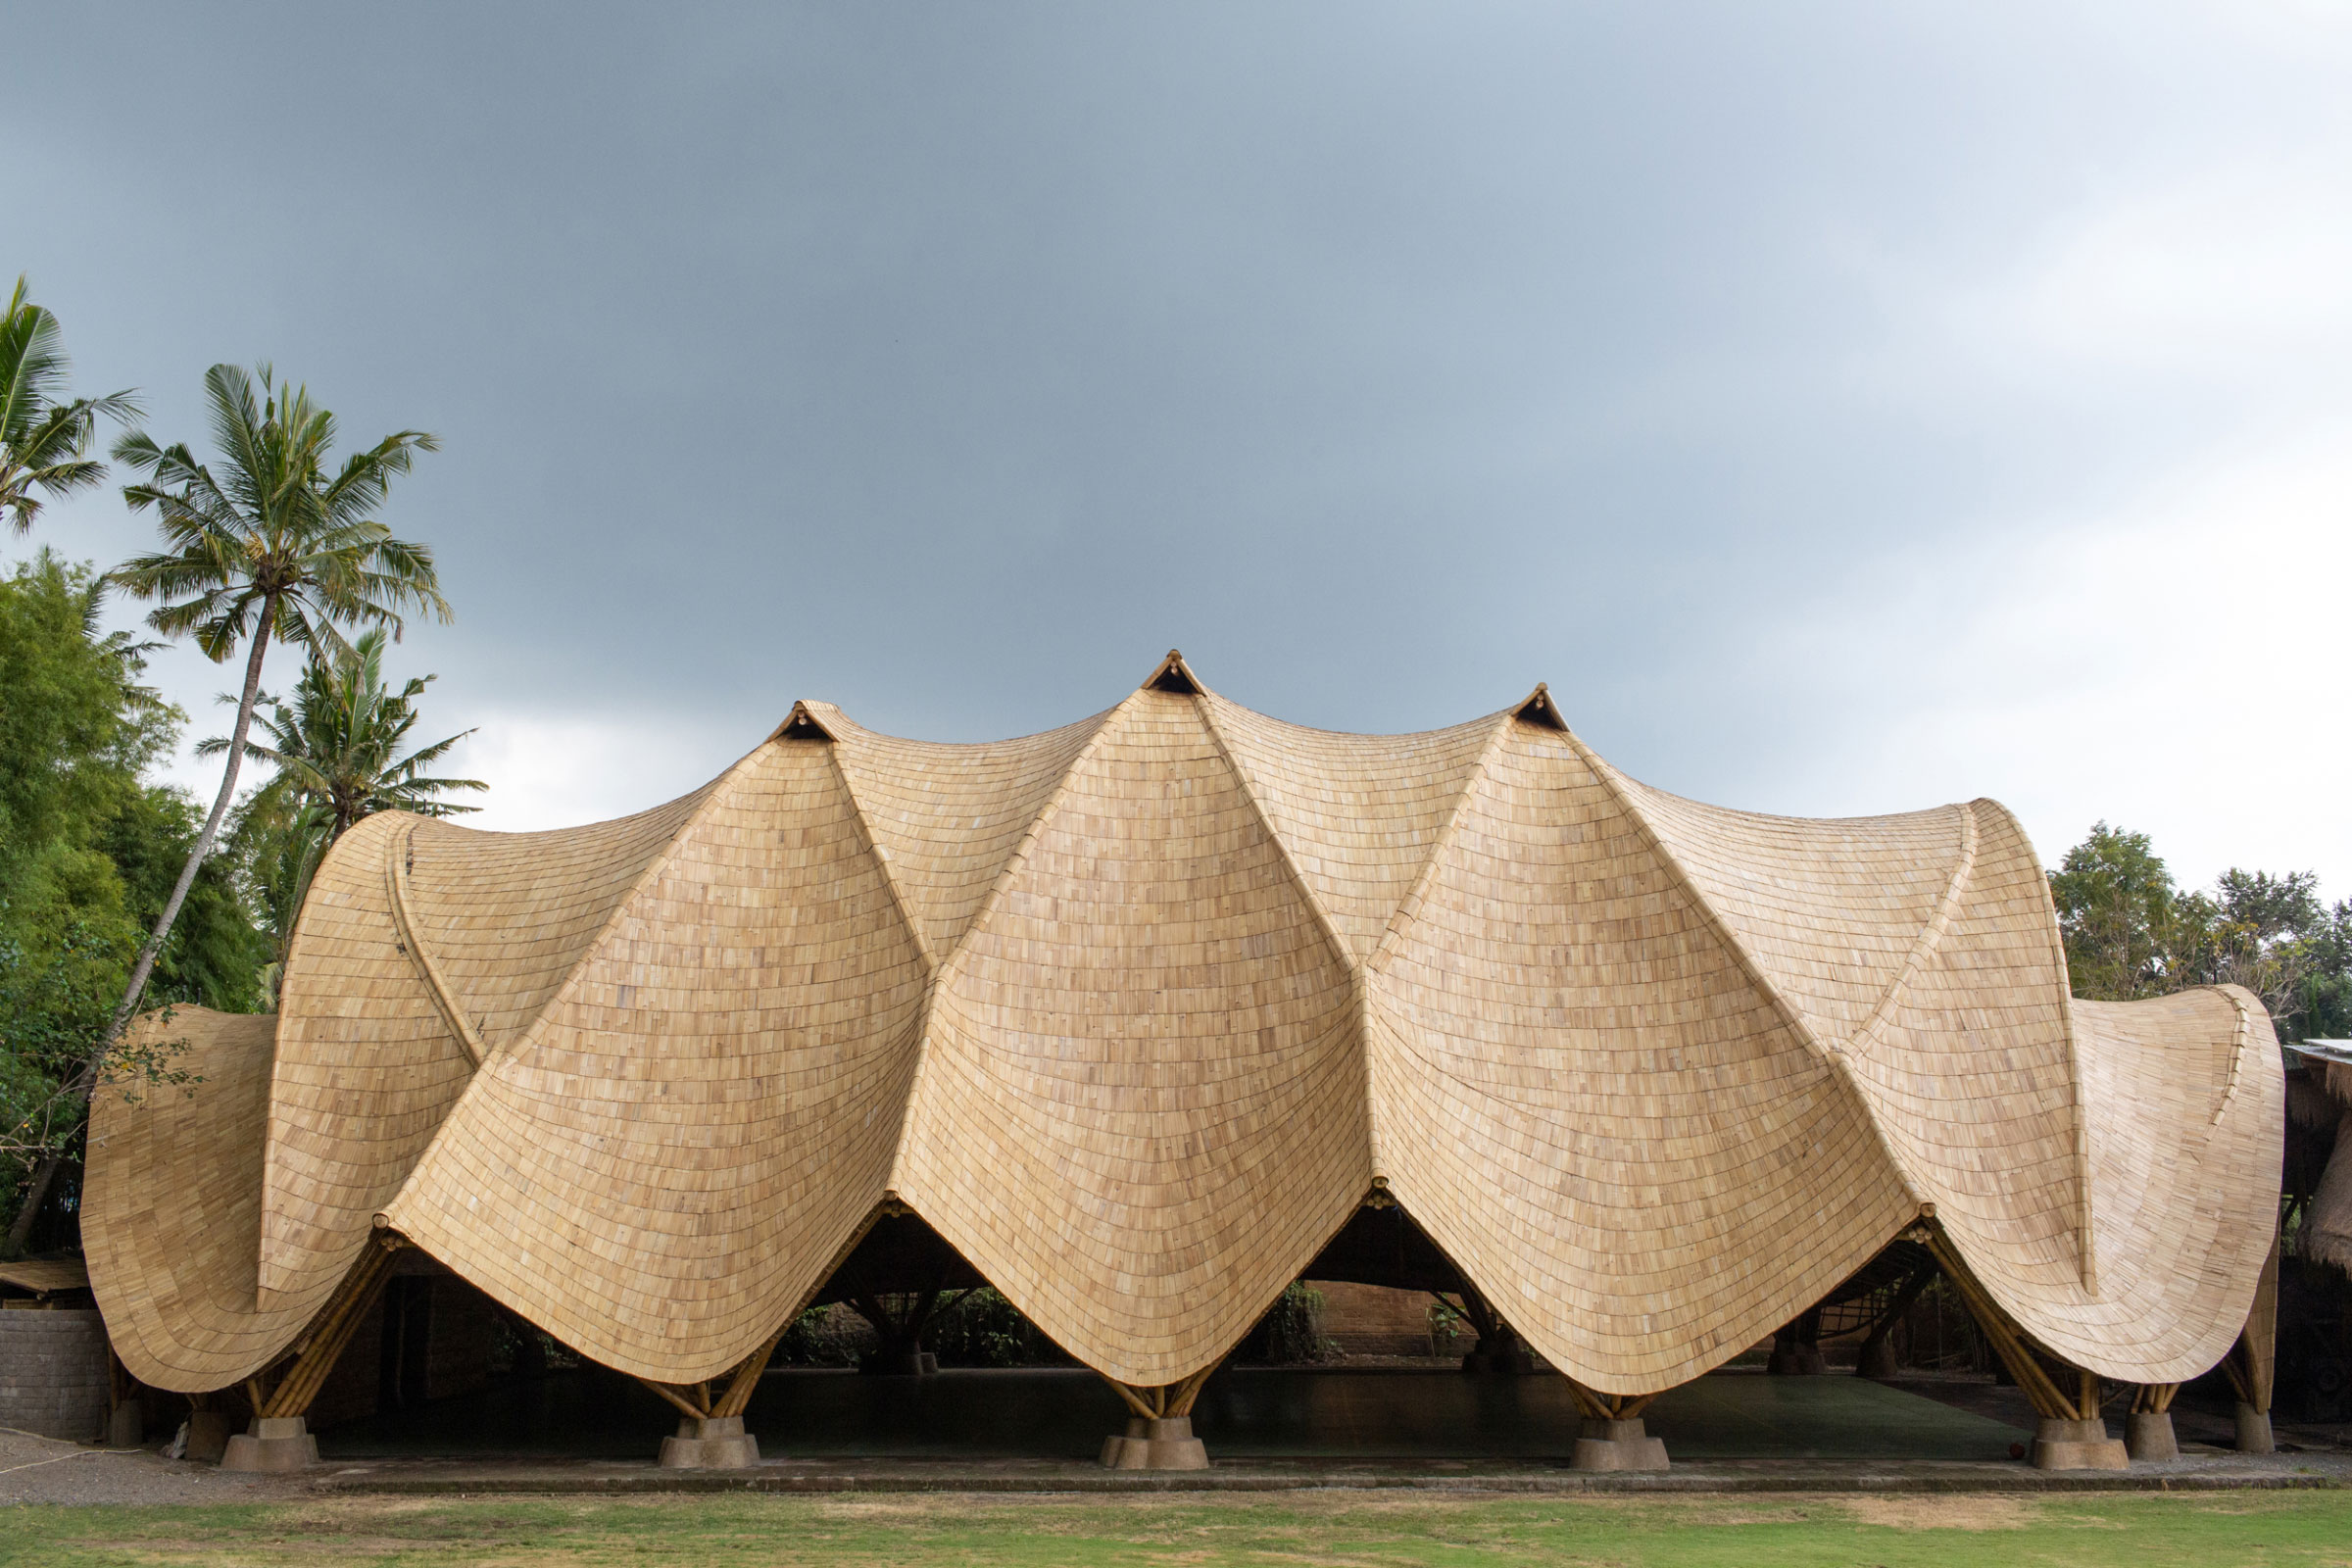 IBUKU Designed This School Facility in Bali Using Only Bamboo